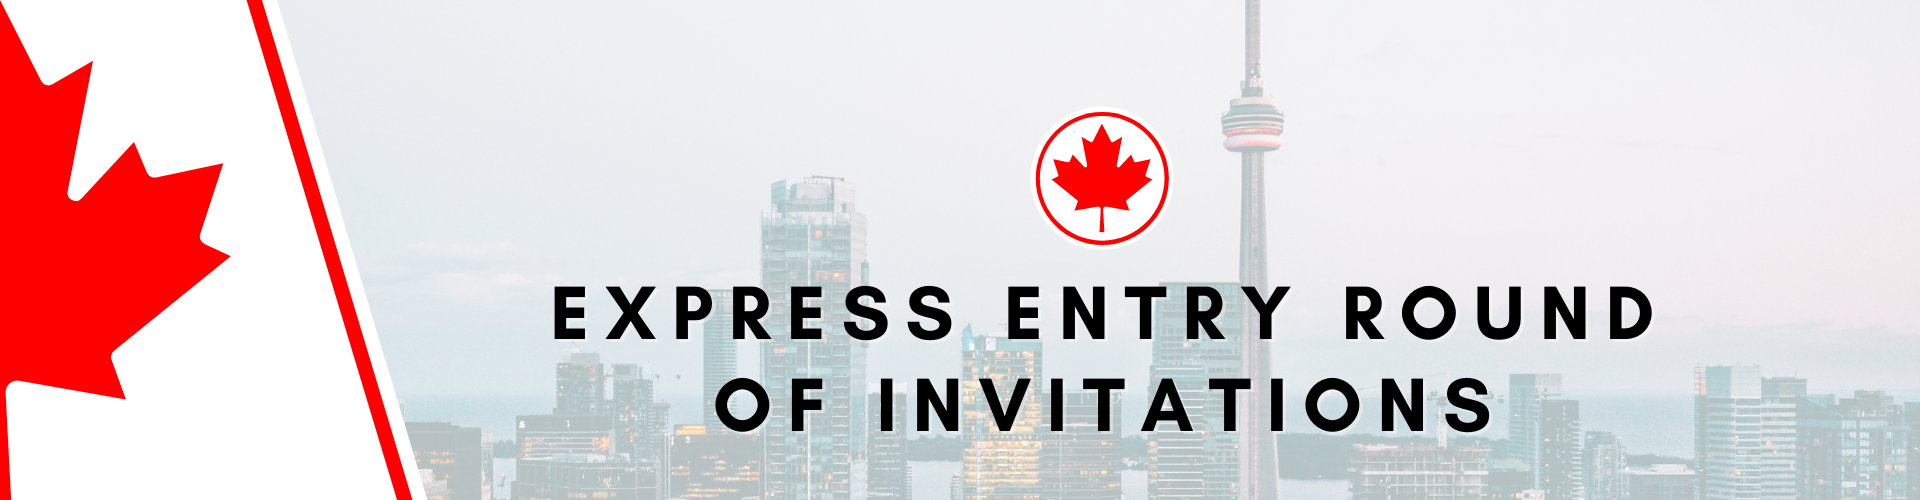 Express Entry Rounds Of Invitations